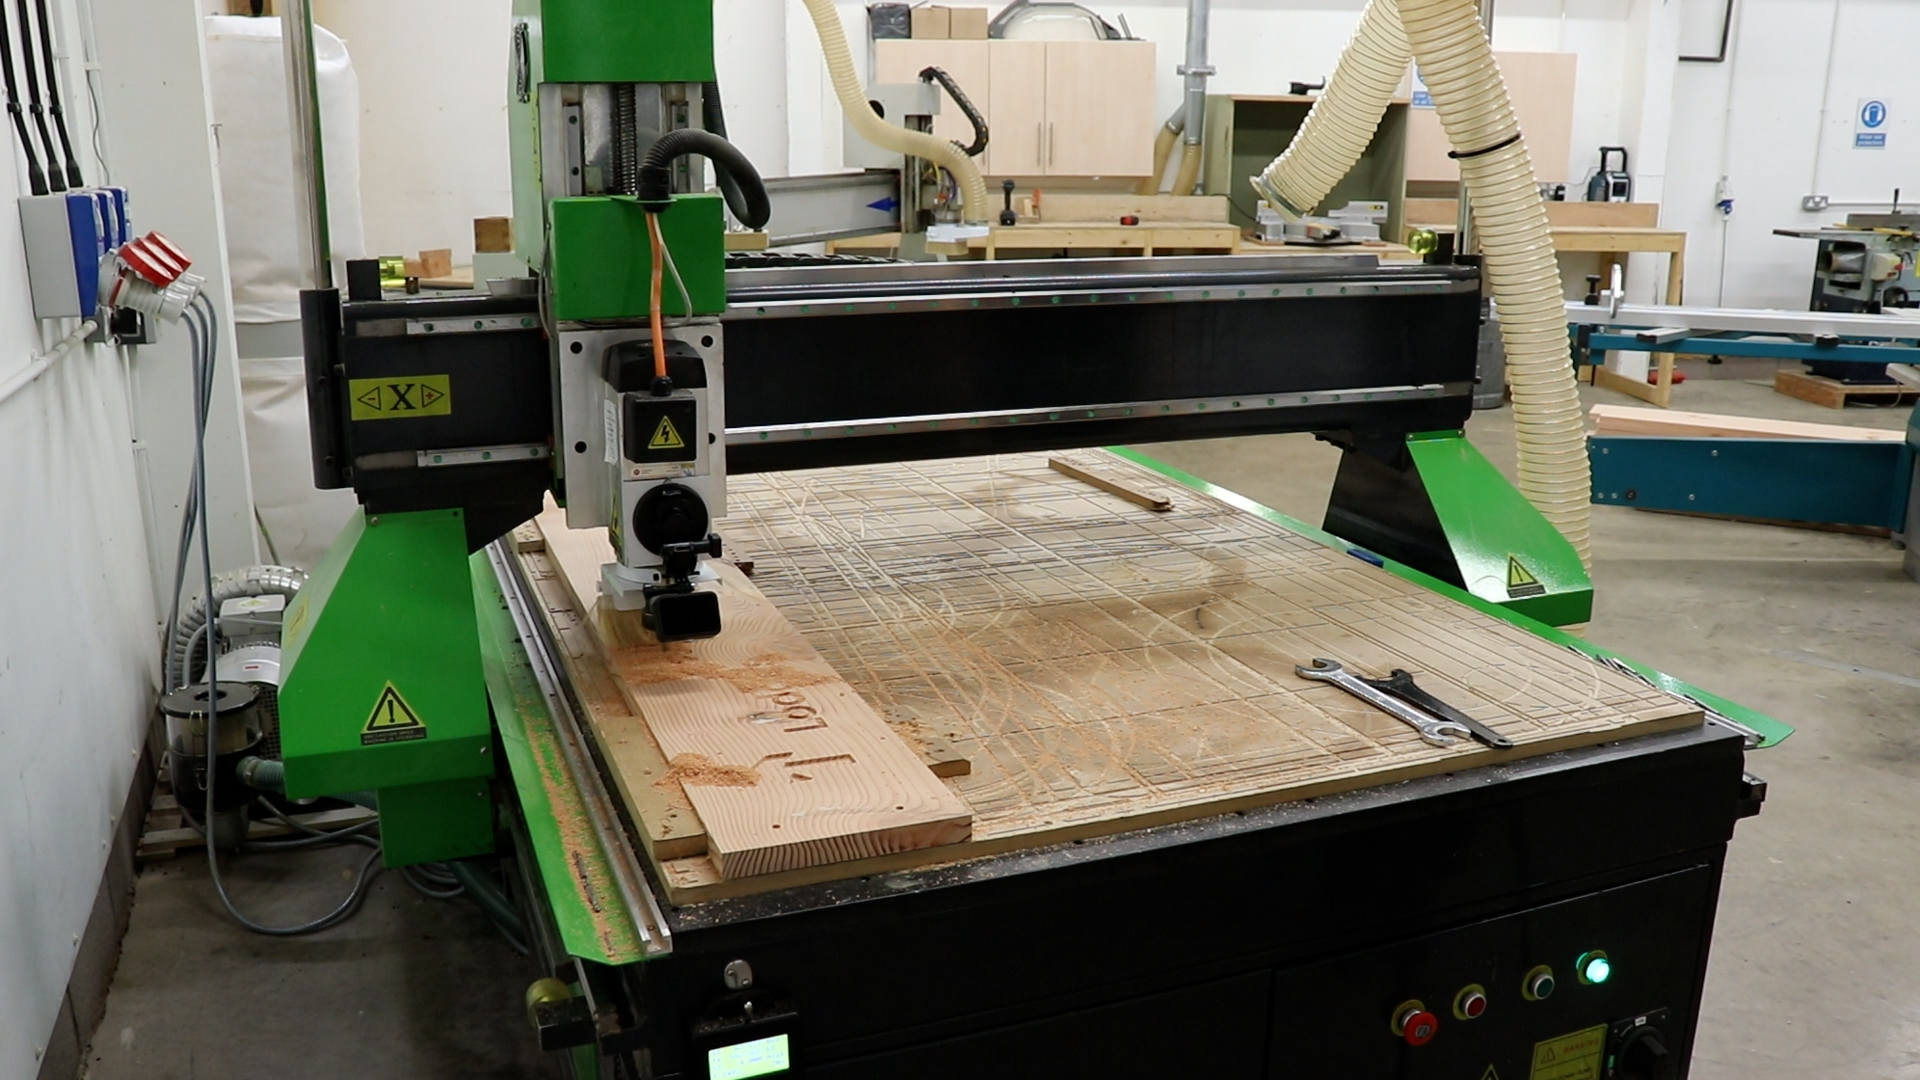 A CNC router carving a wooden board